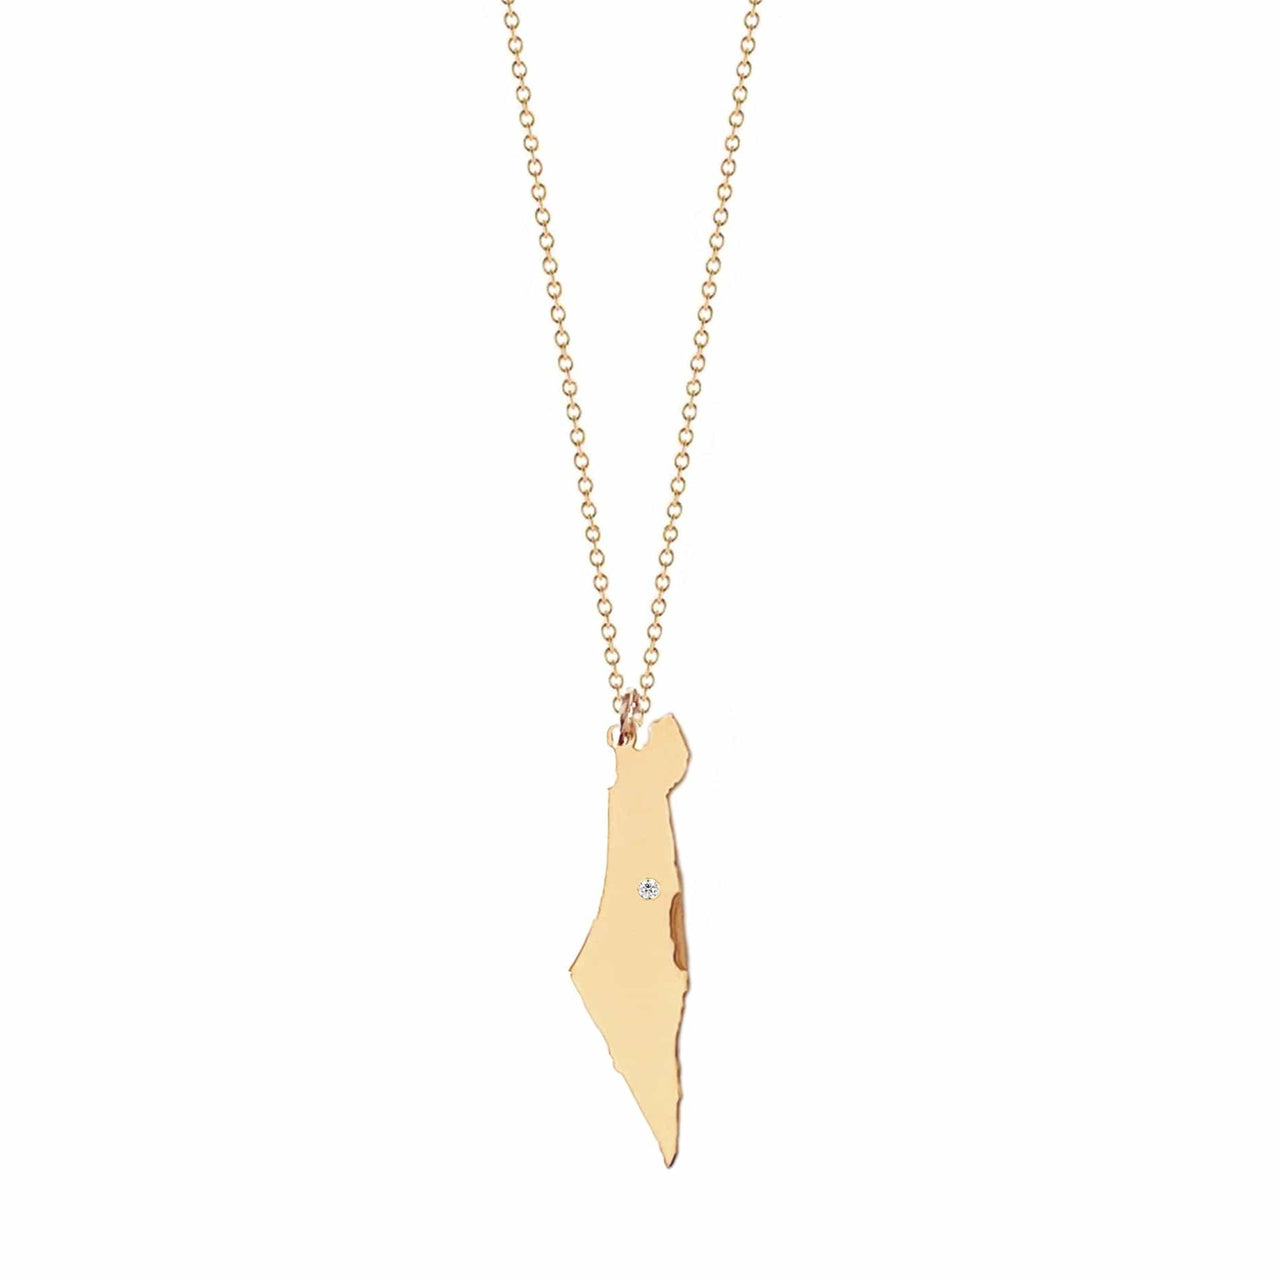 Miriam Merenfeld Jewelry Necklaces Eretz Israel Diamond Necklace - (Sterling Silver or Gold Vermeil)